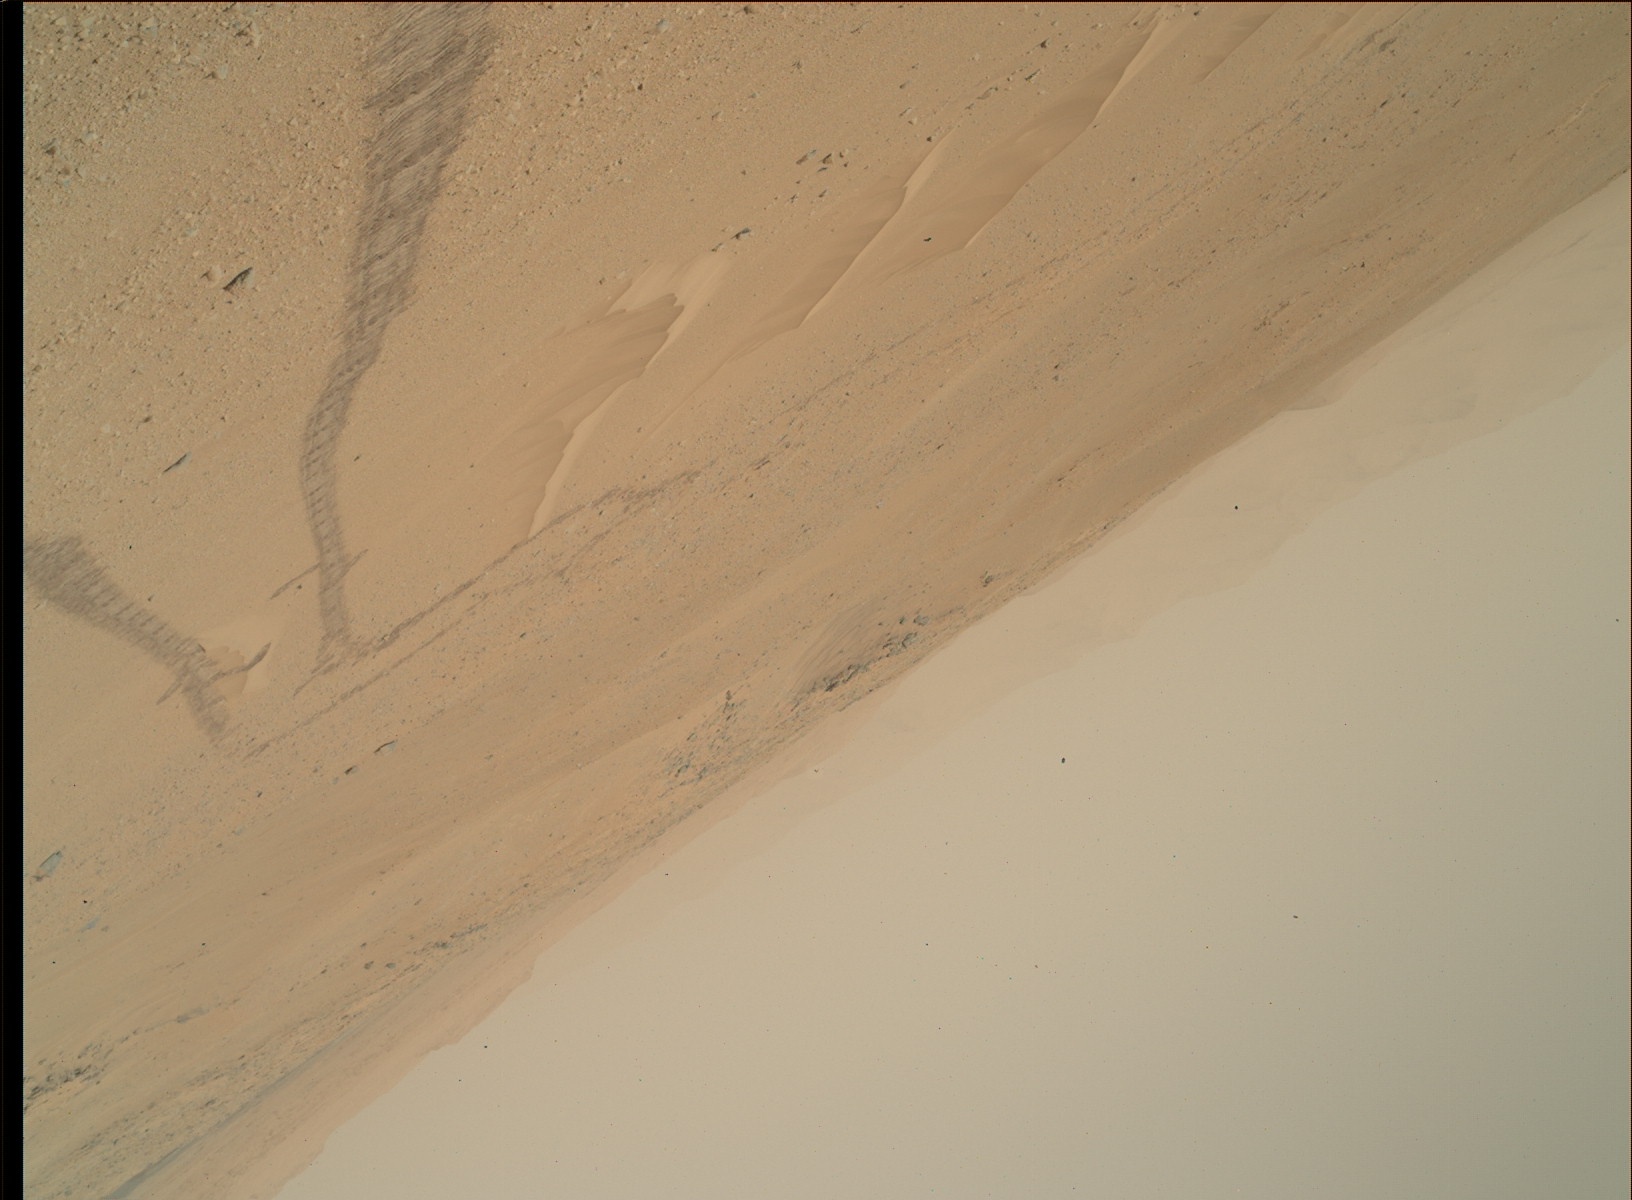 Nasa's Mars rover Curiosity acquired this image using its Mars Hand Lens Imager (MAHLI) on Sol 669